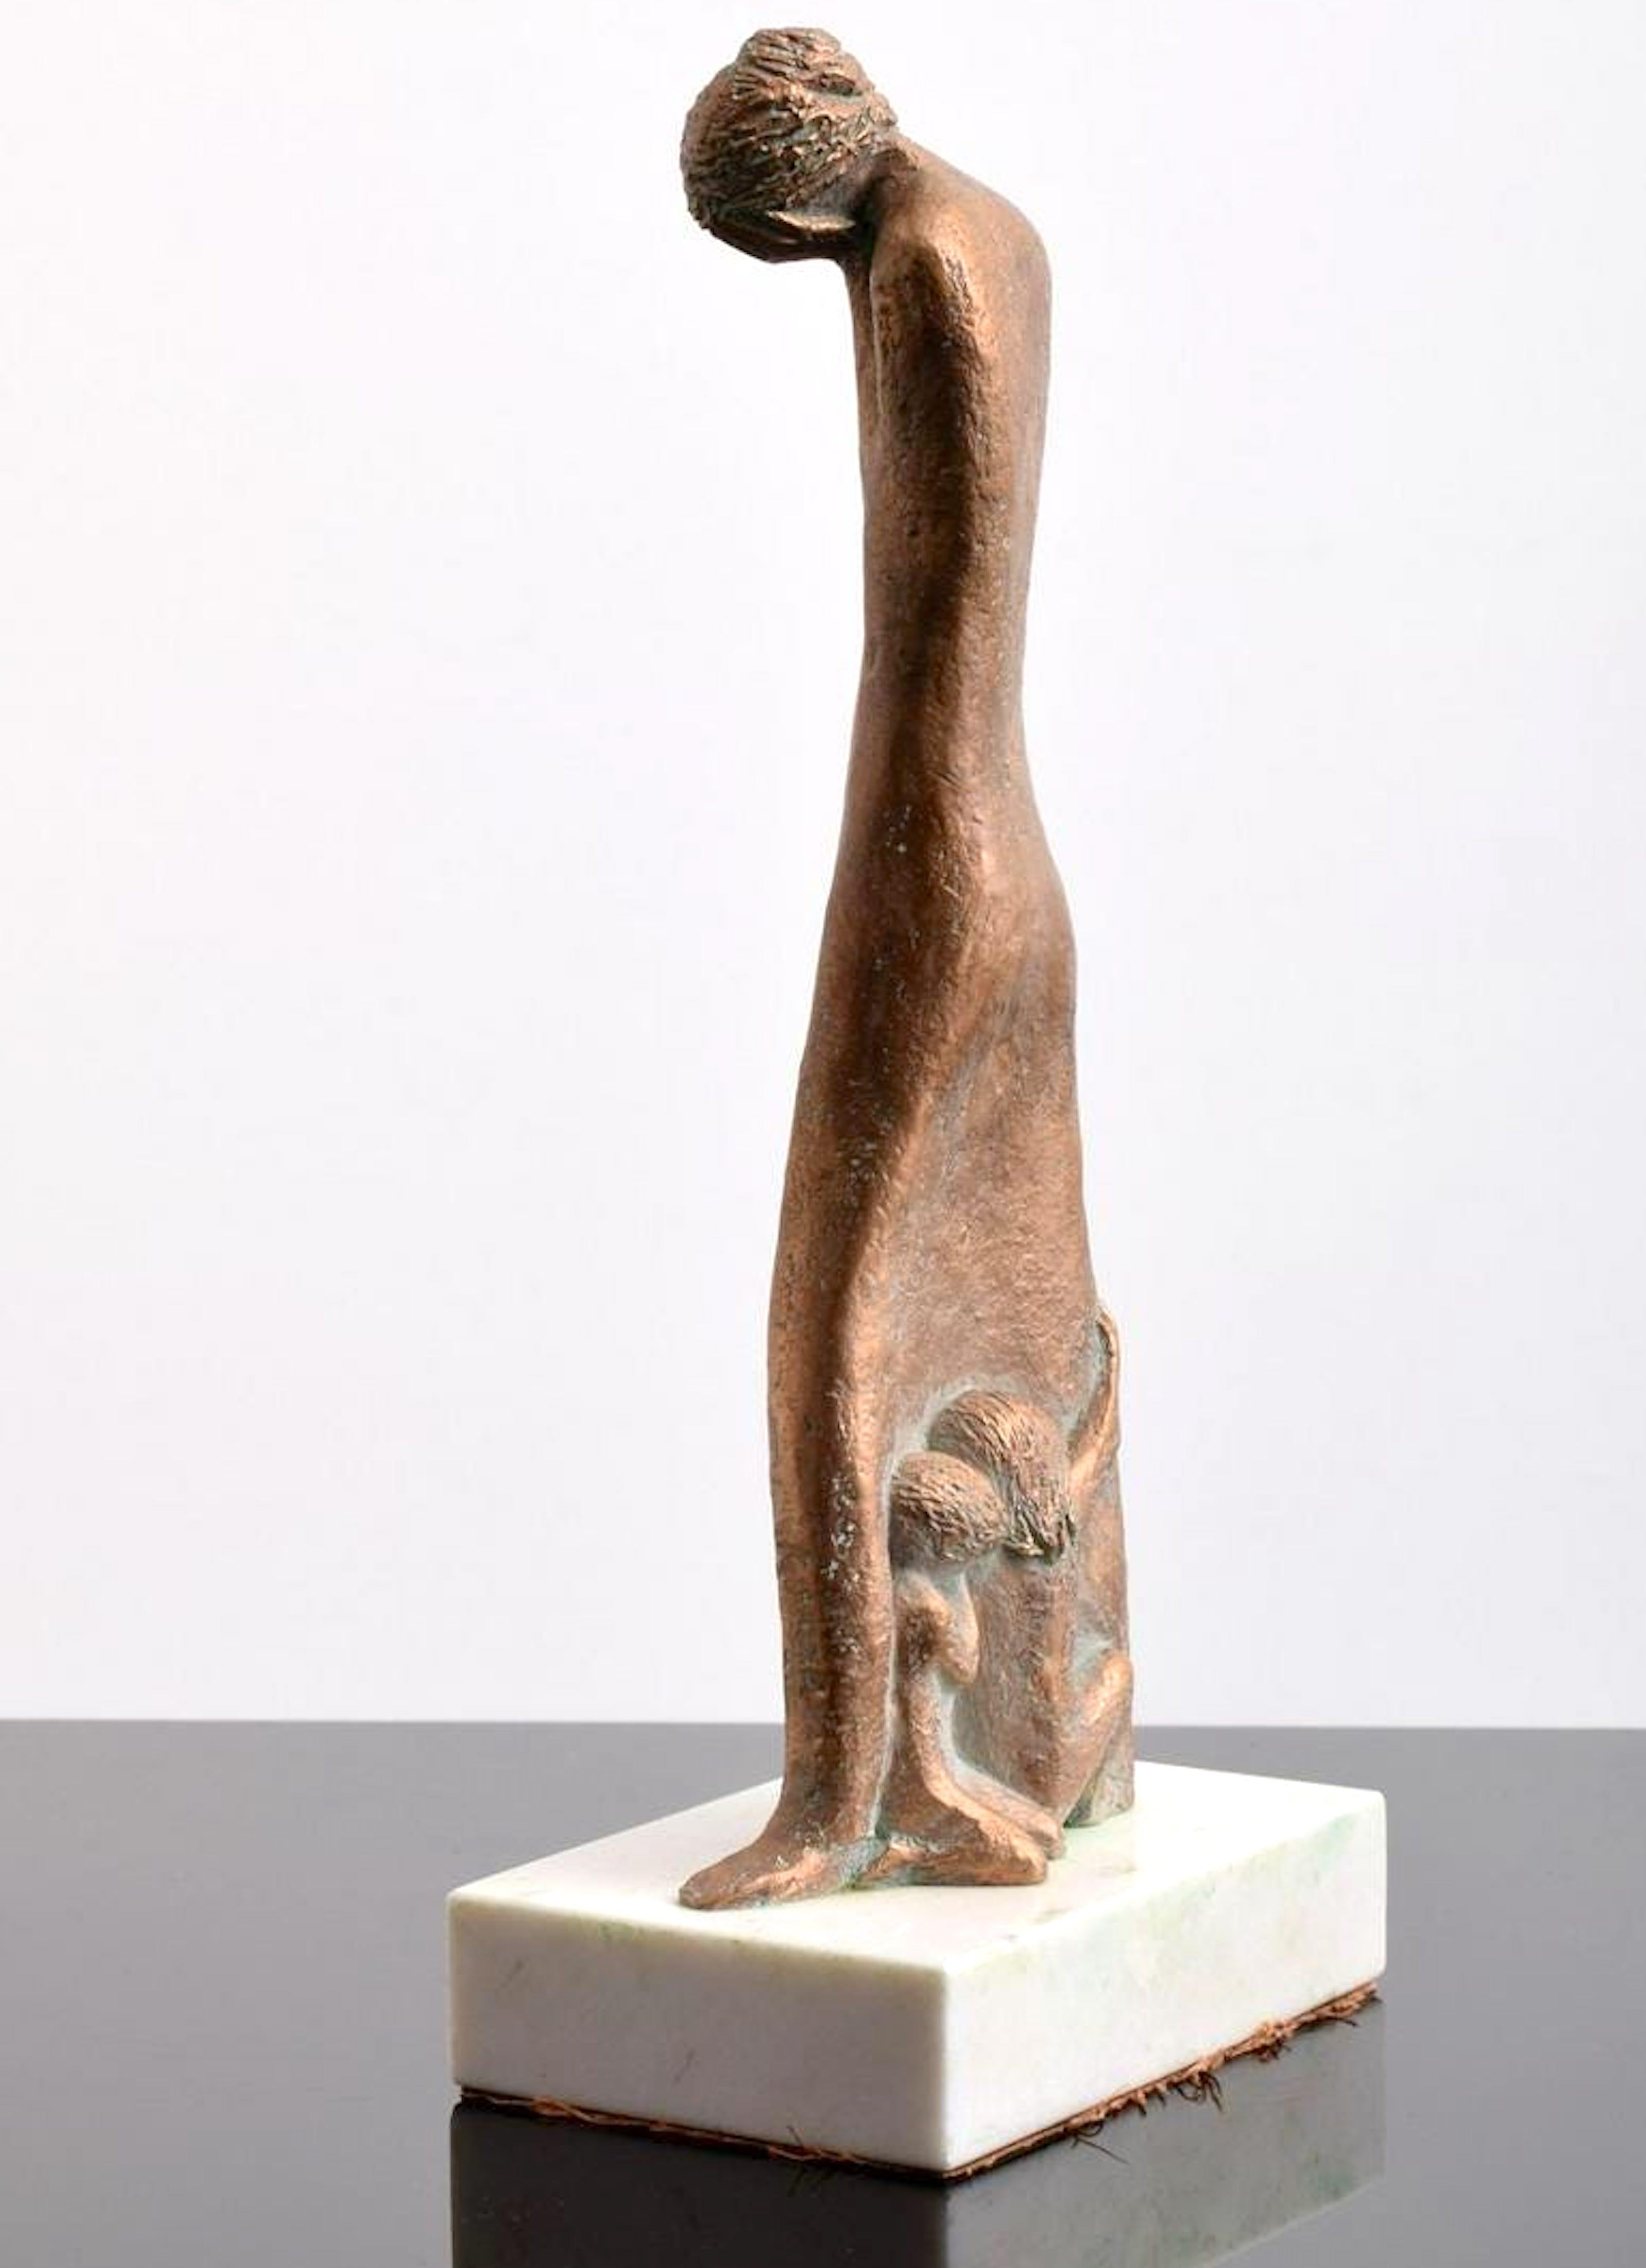 Bronze, signed on rear leg, featuring two children hiding in their mother's dress.
Measures: 14